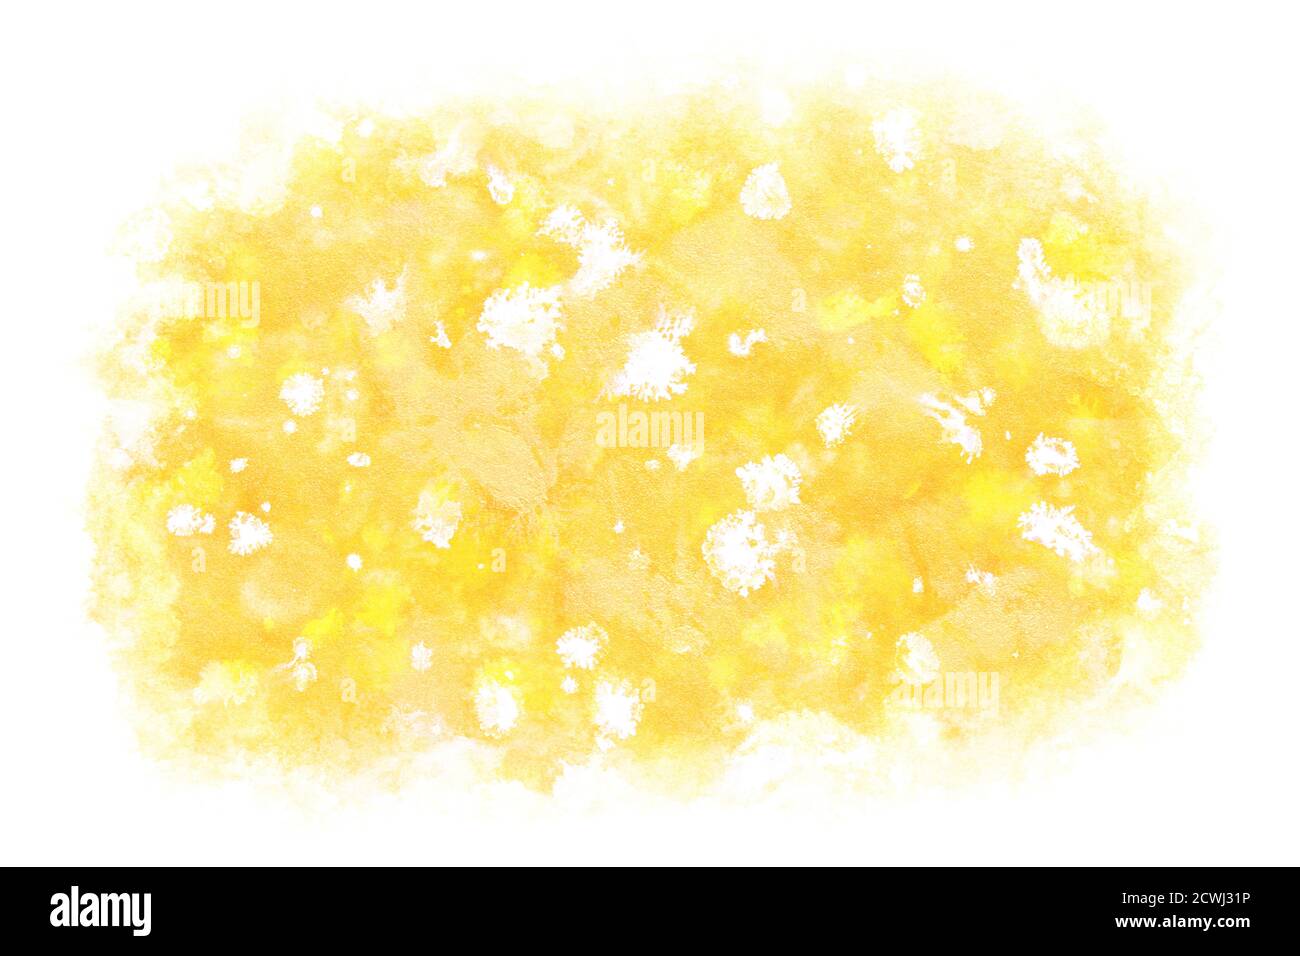 Christmas gold color splash abstract or natural vintage watercolor hand paint background Stock Photo